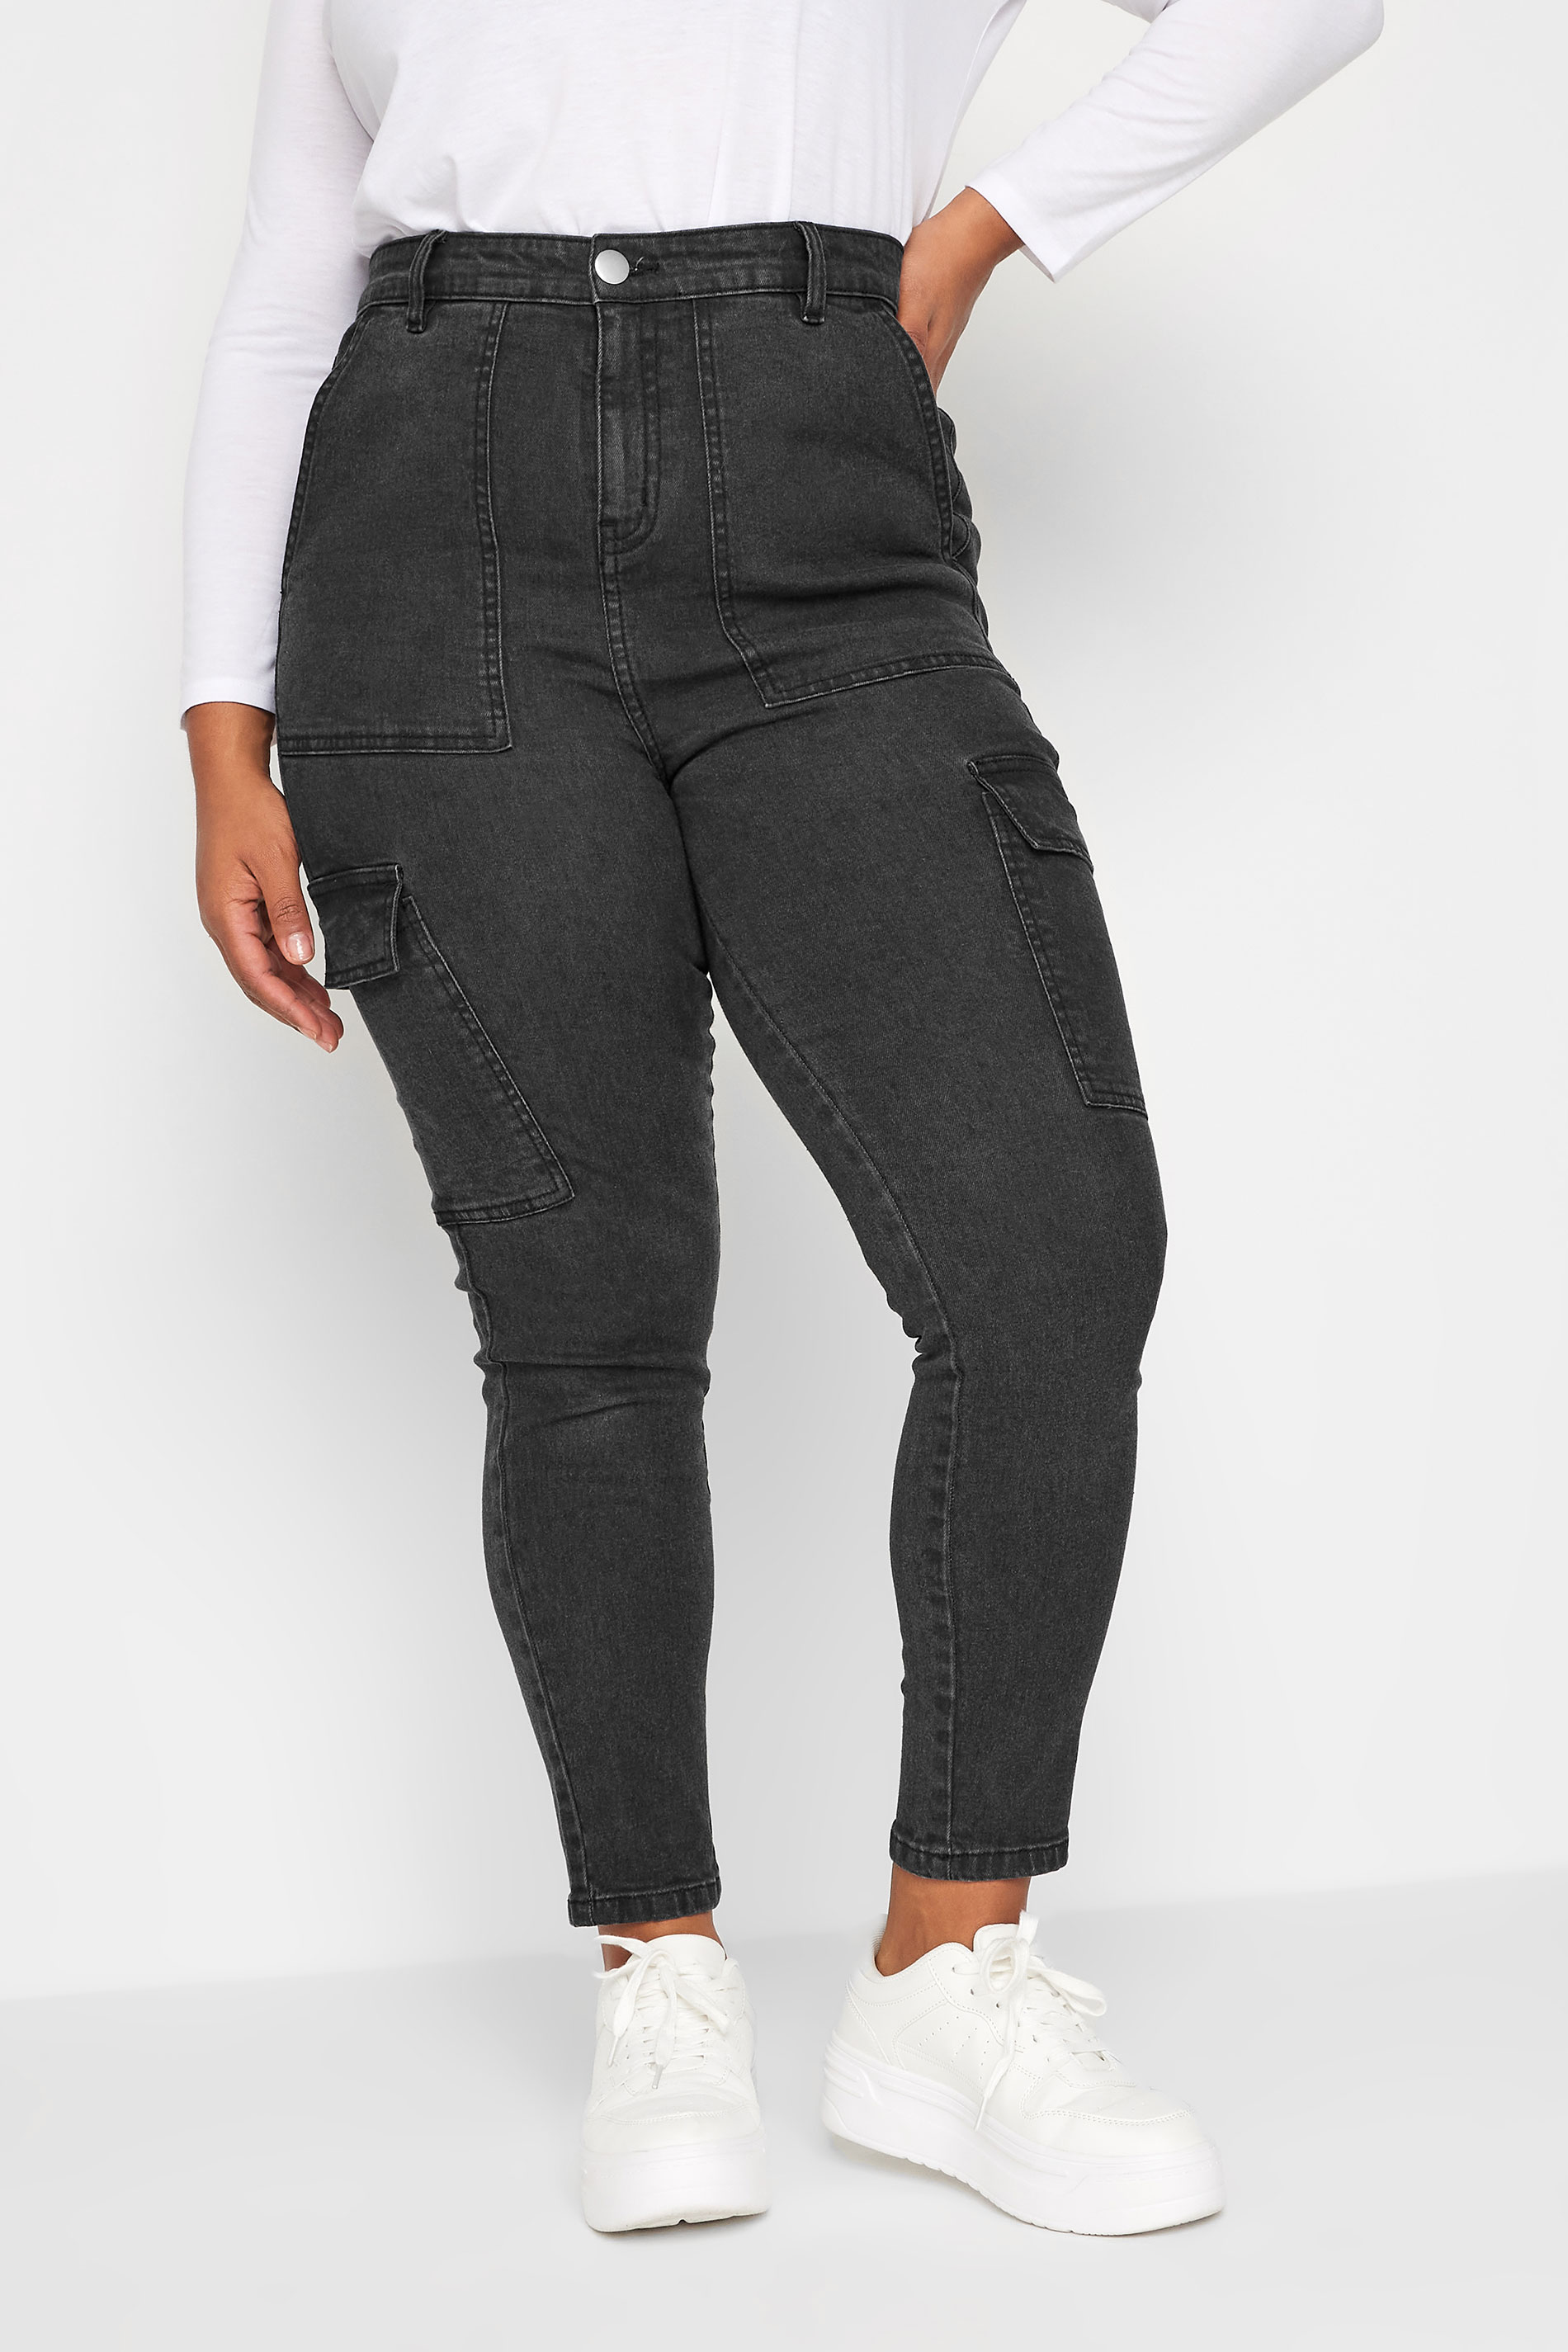 YOURS Curve Plus Size Grey Cargo AVA Jeans | Yours Clothing  1